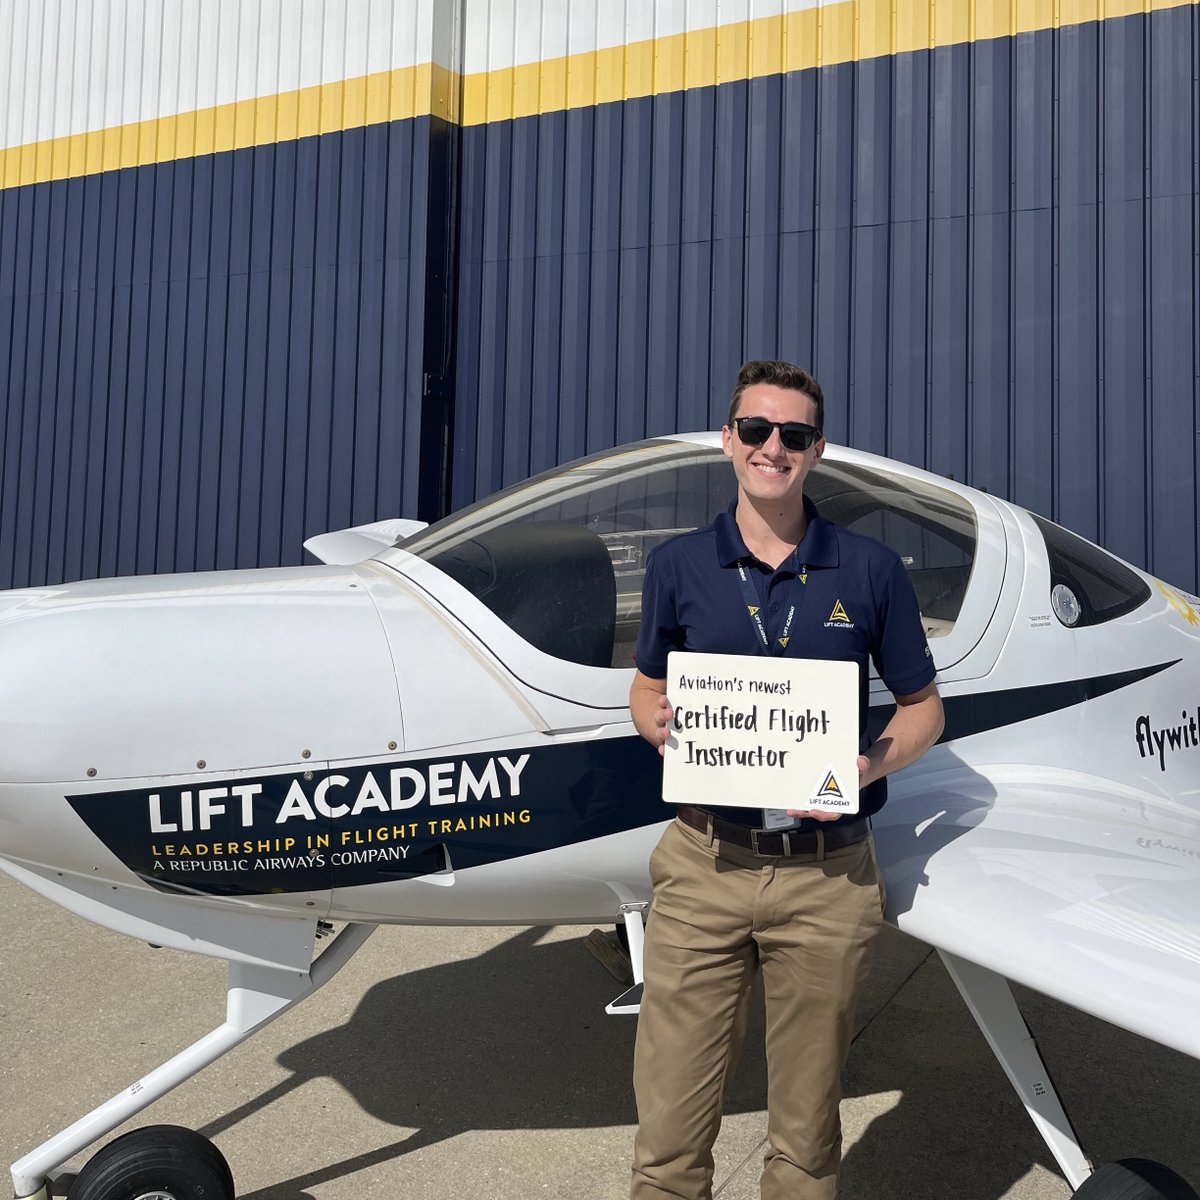 It’s #MilestoneMonday once again, and we’re celebrating Jeremy Chesney for his successful CFI Check Ride! He is now an official CFI and can start training students in the skies at LIFT. Congrats, Jeremy 🎉 ! See more about LIFT student life at flywithlift.com #FlyWithLIFT